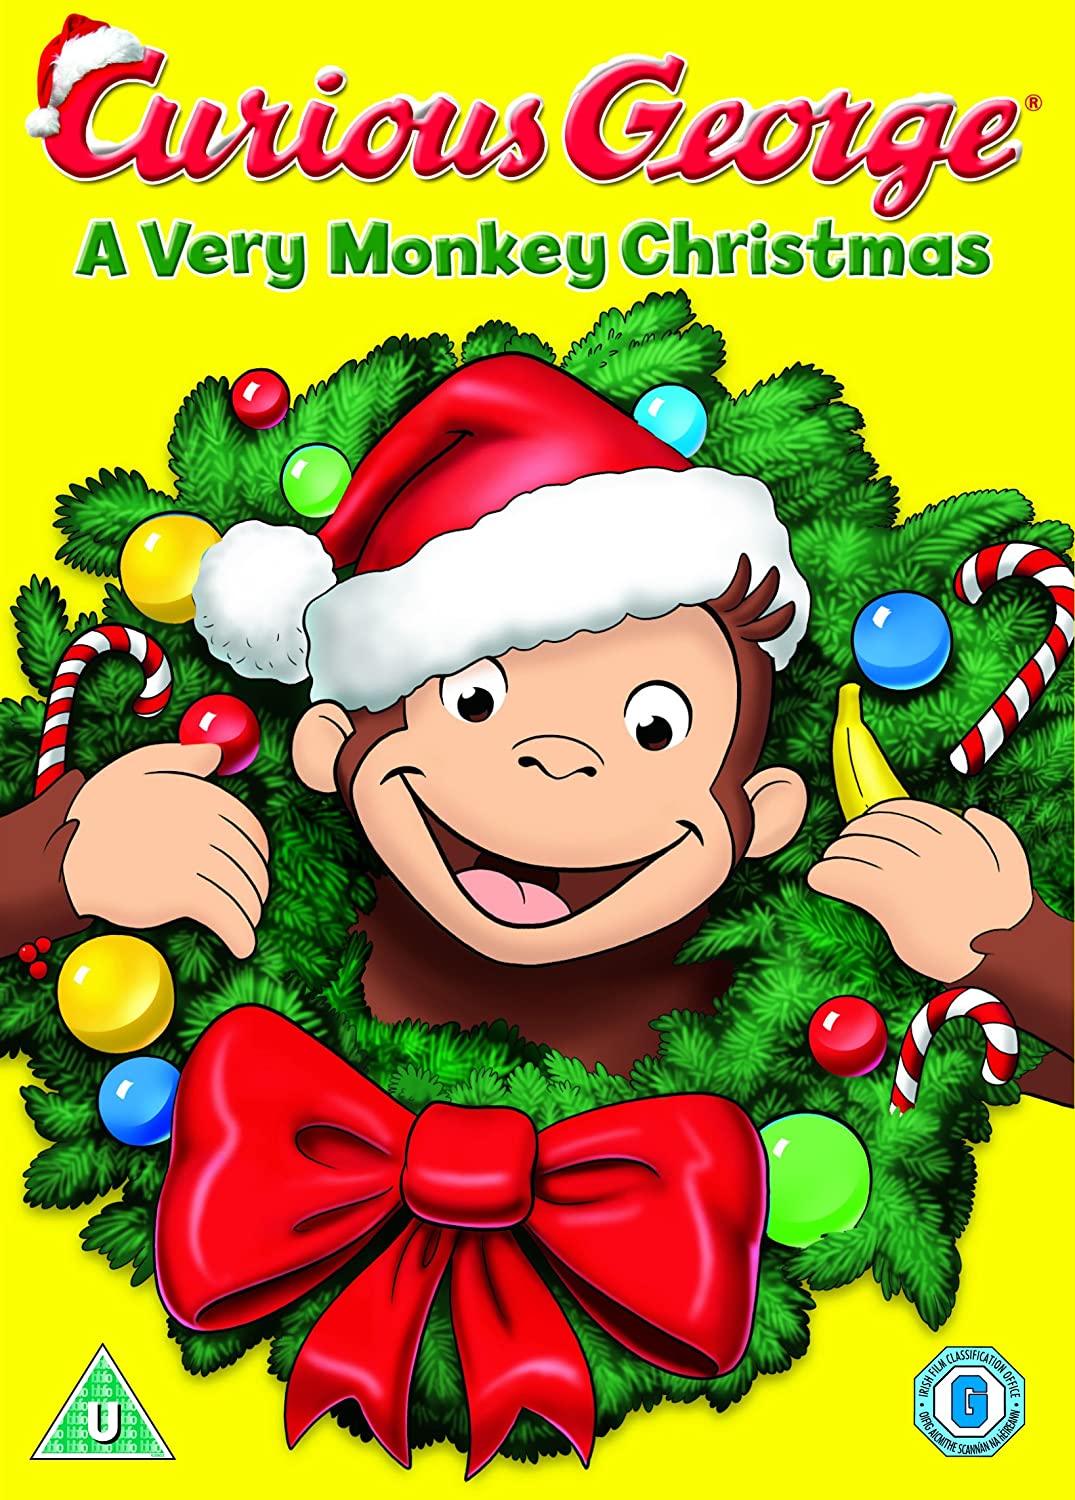 Curious George: A Very Monkey Christmas [Animation] (Includes Christmas Decoration) [DVD]